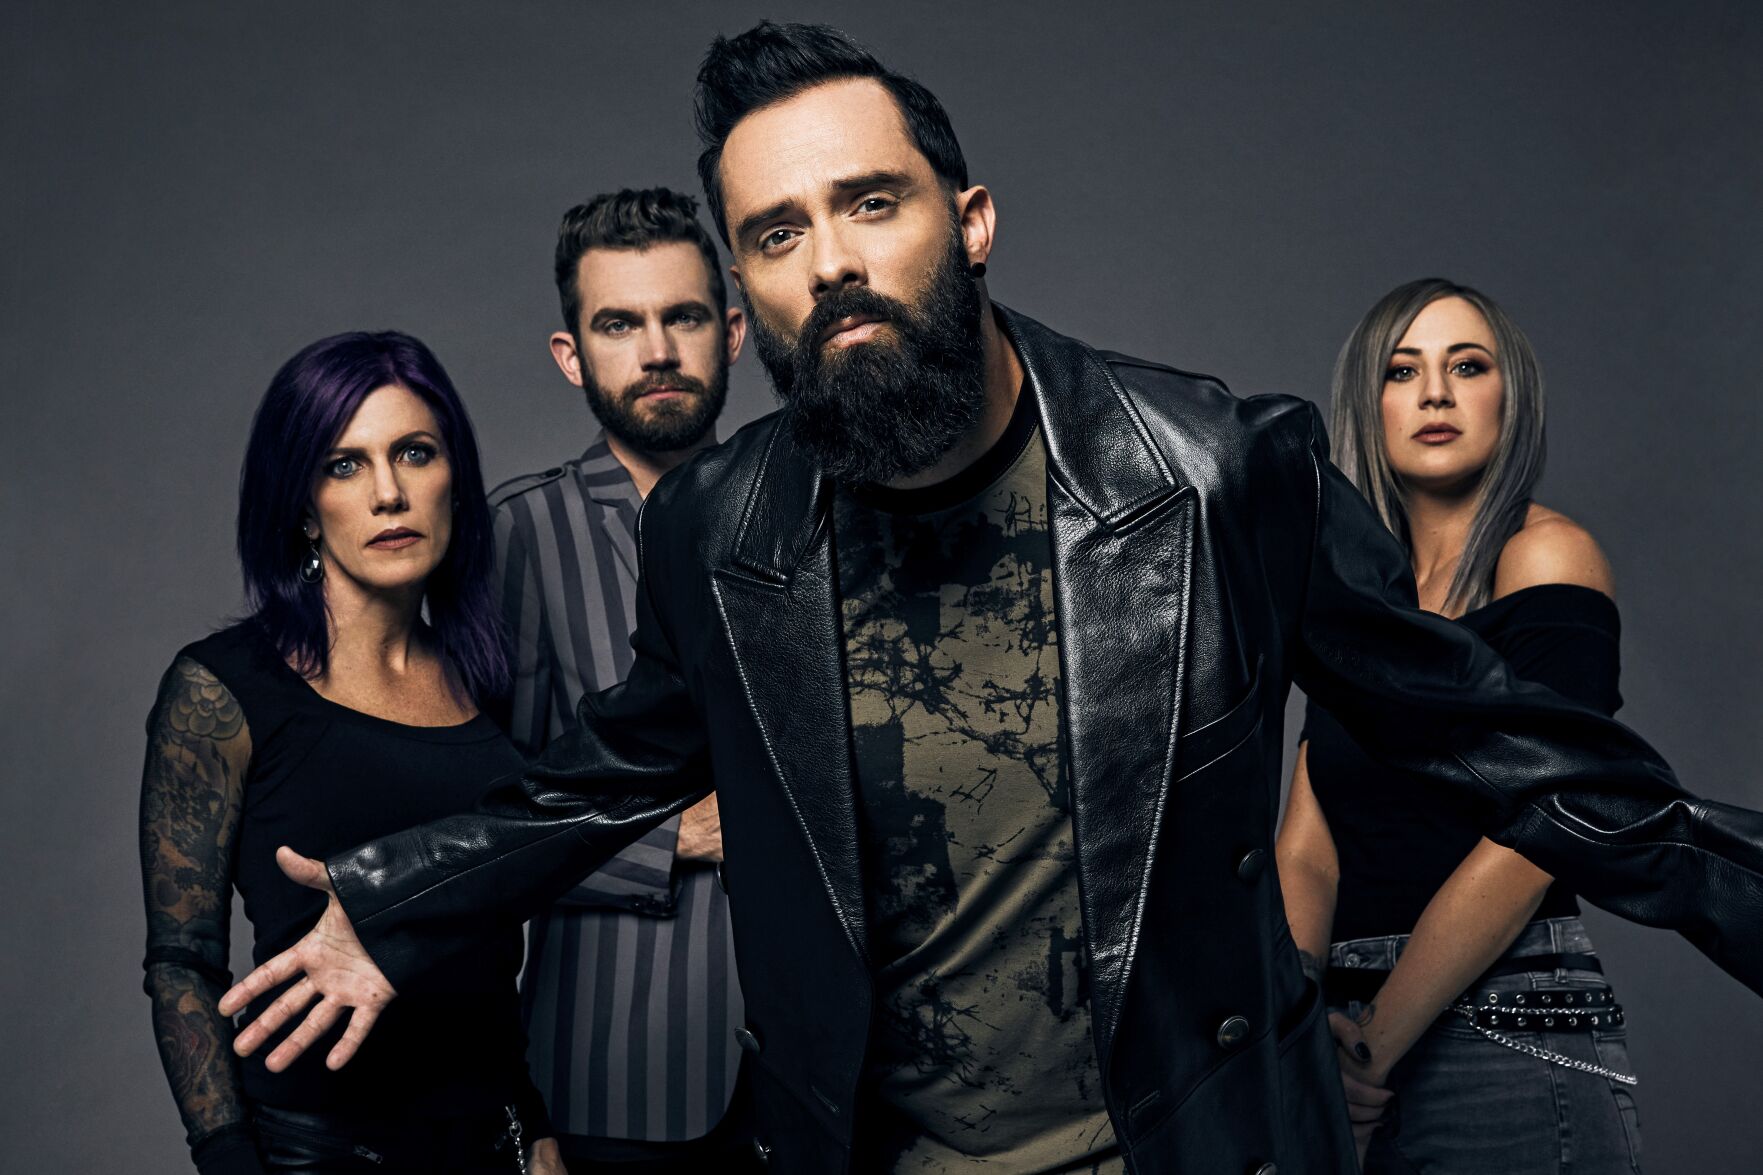 Skillet joins Theory of a Deadman for MetraPark show Nov. 7